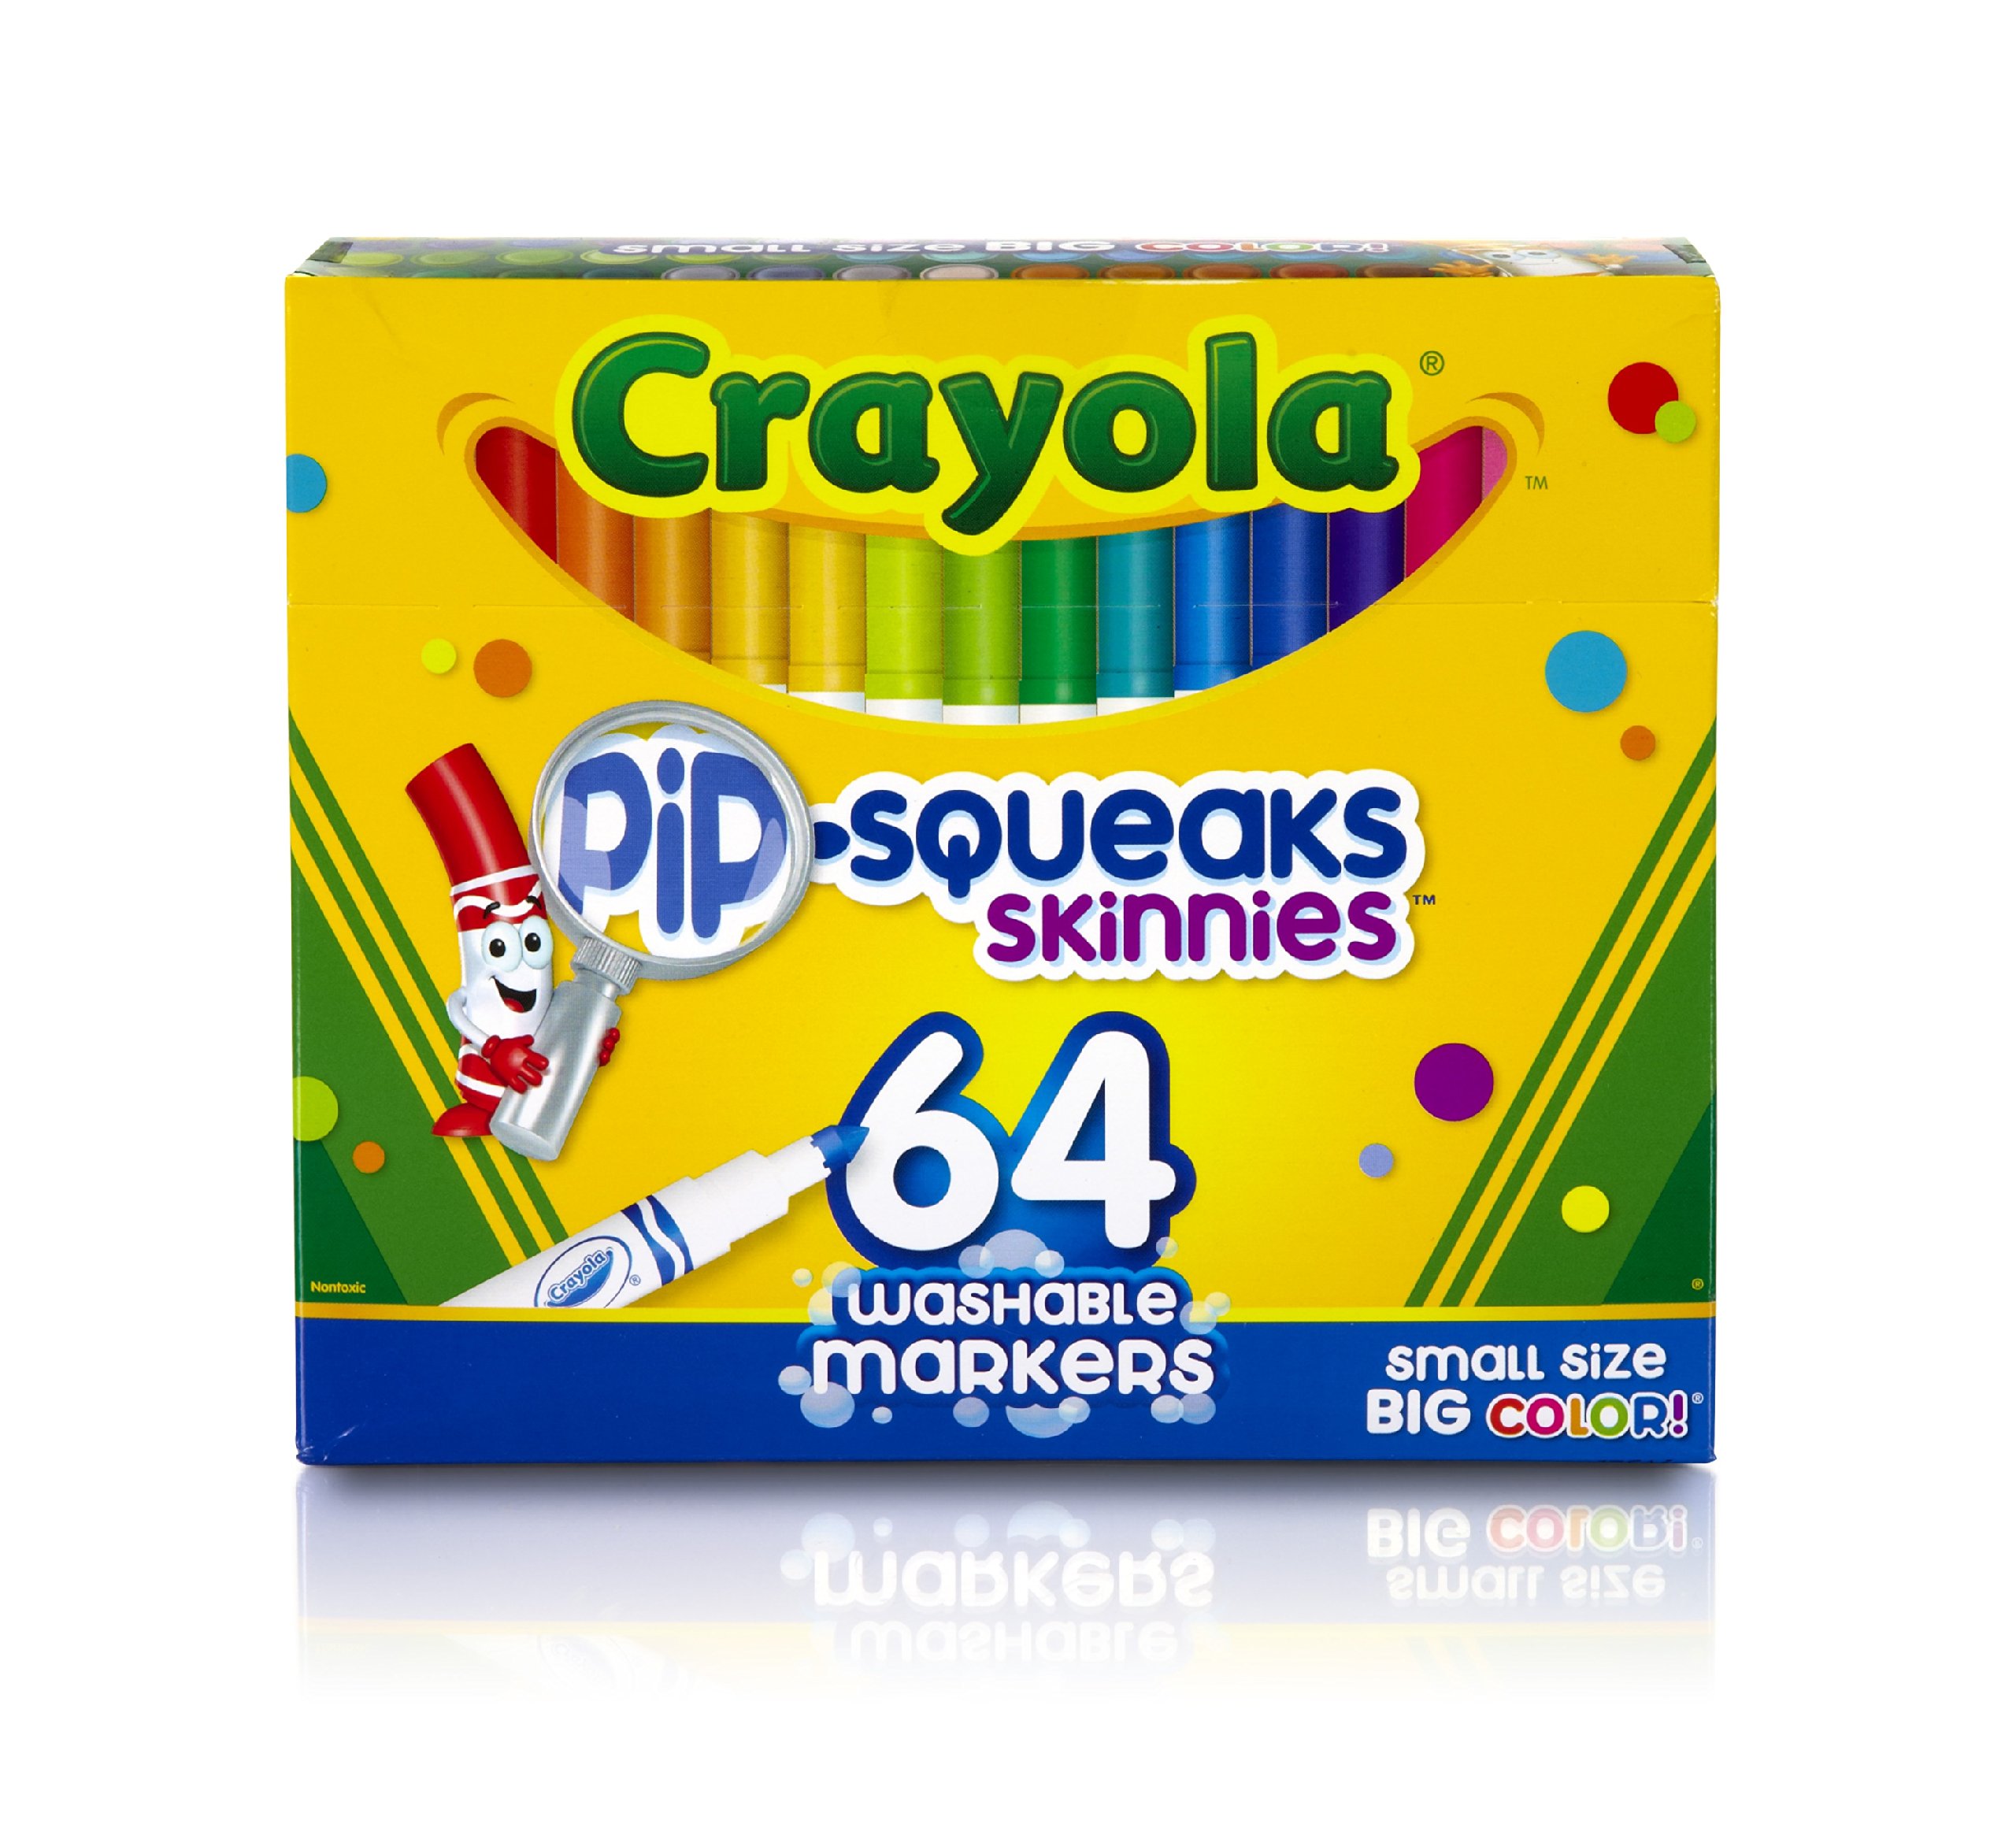 Crayola 58-7713 Fineline Markers 12 Vibrant Colors with Fine Tips